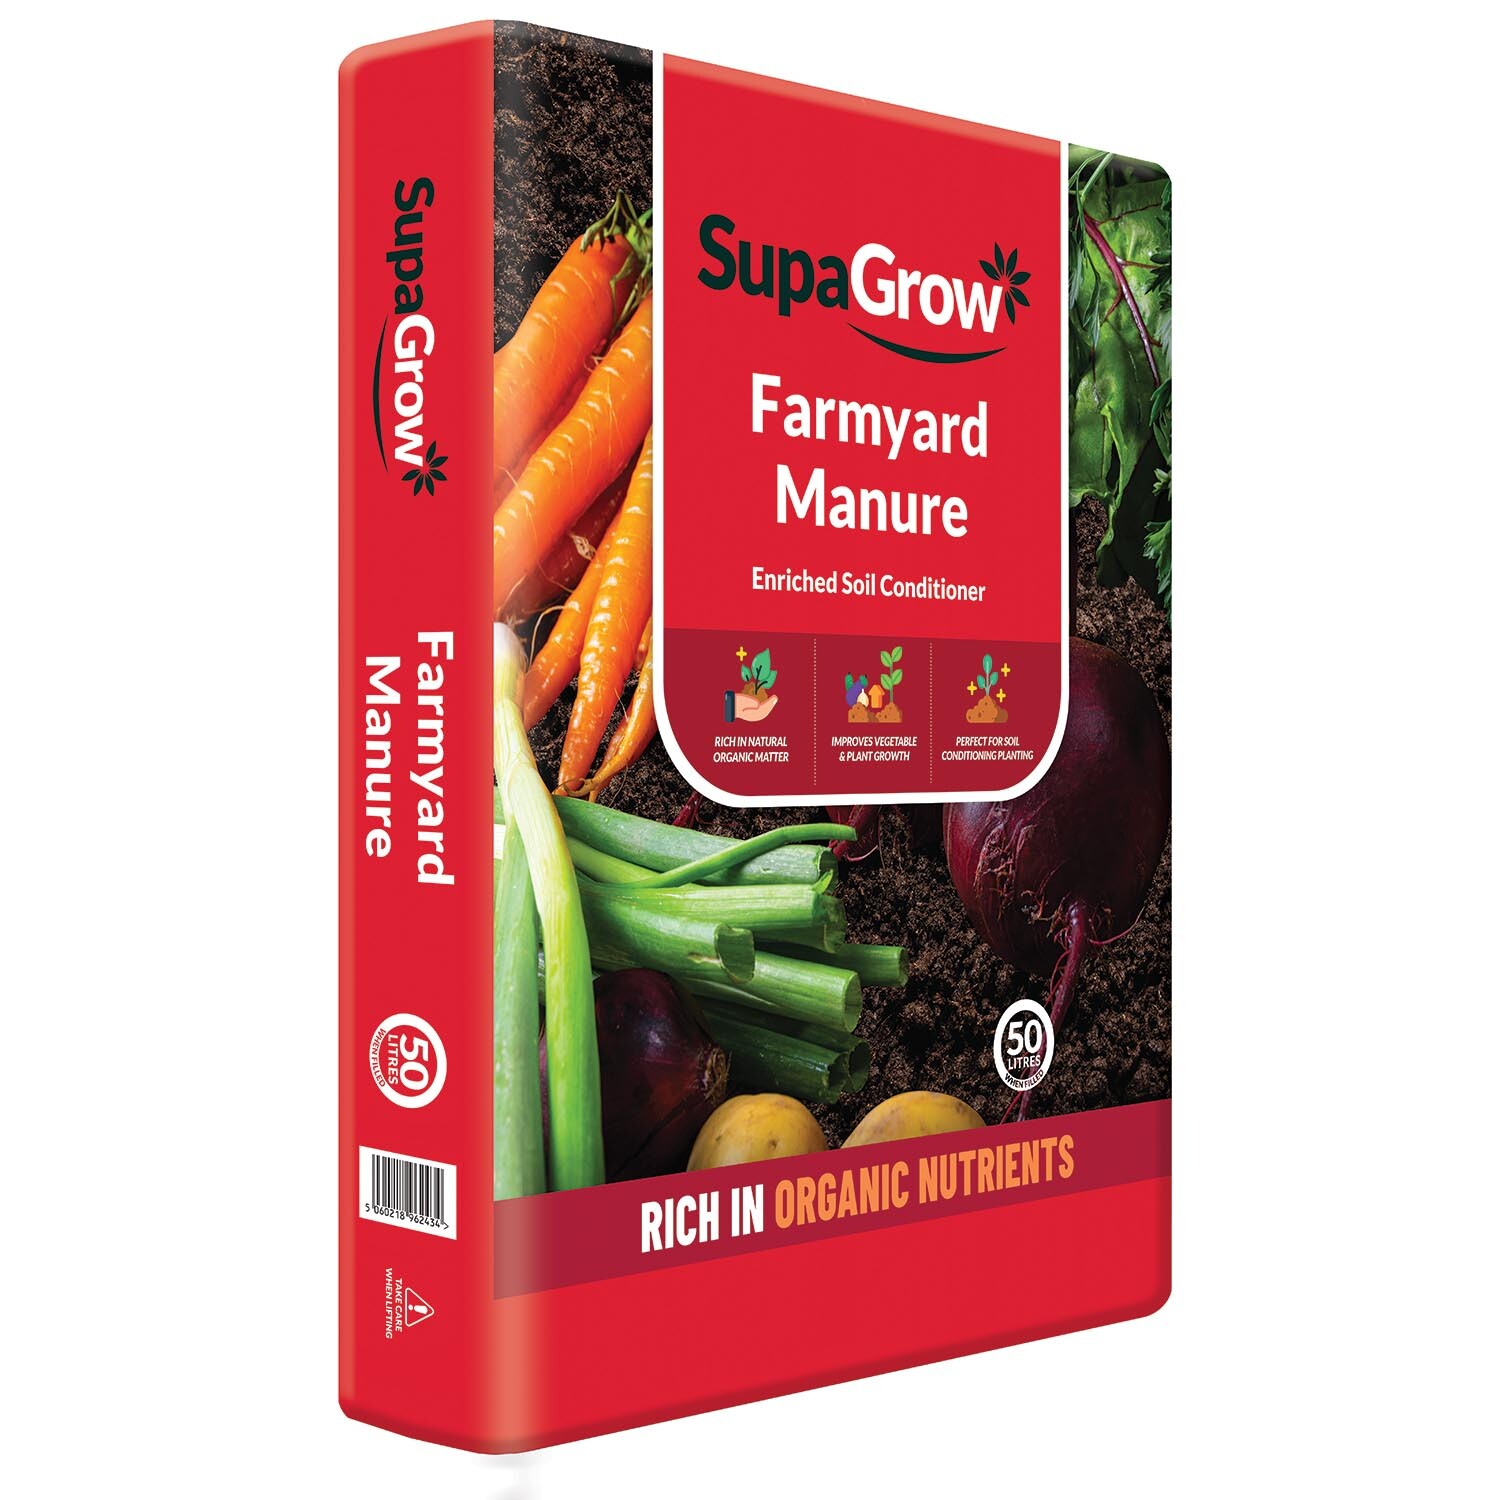 SupaGrow Farmyard Manure Enriched Soil Conditioner 50L Image